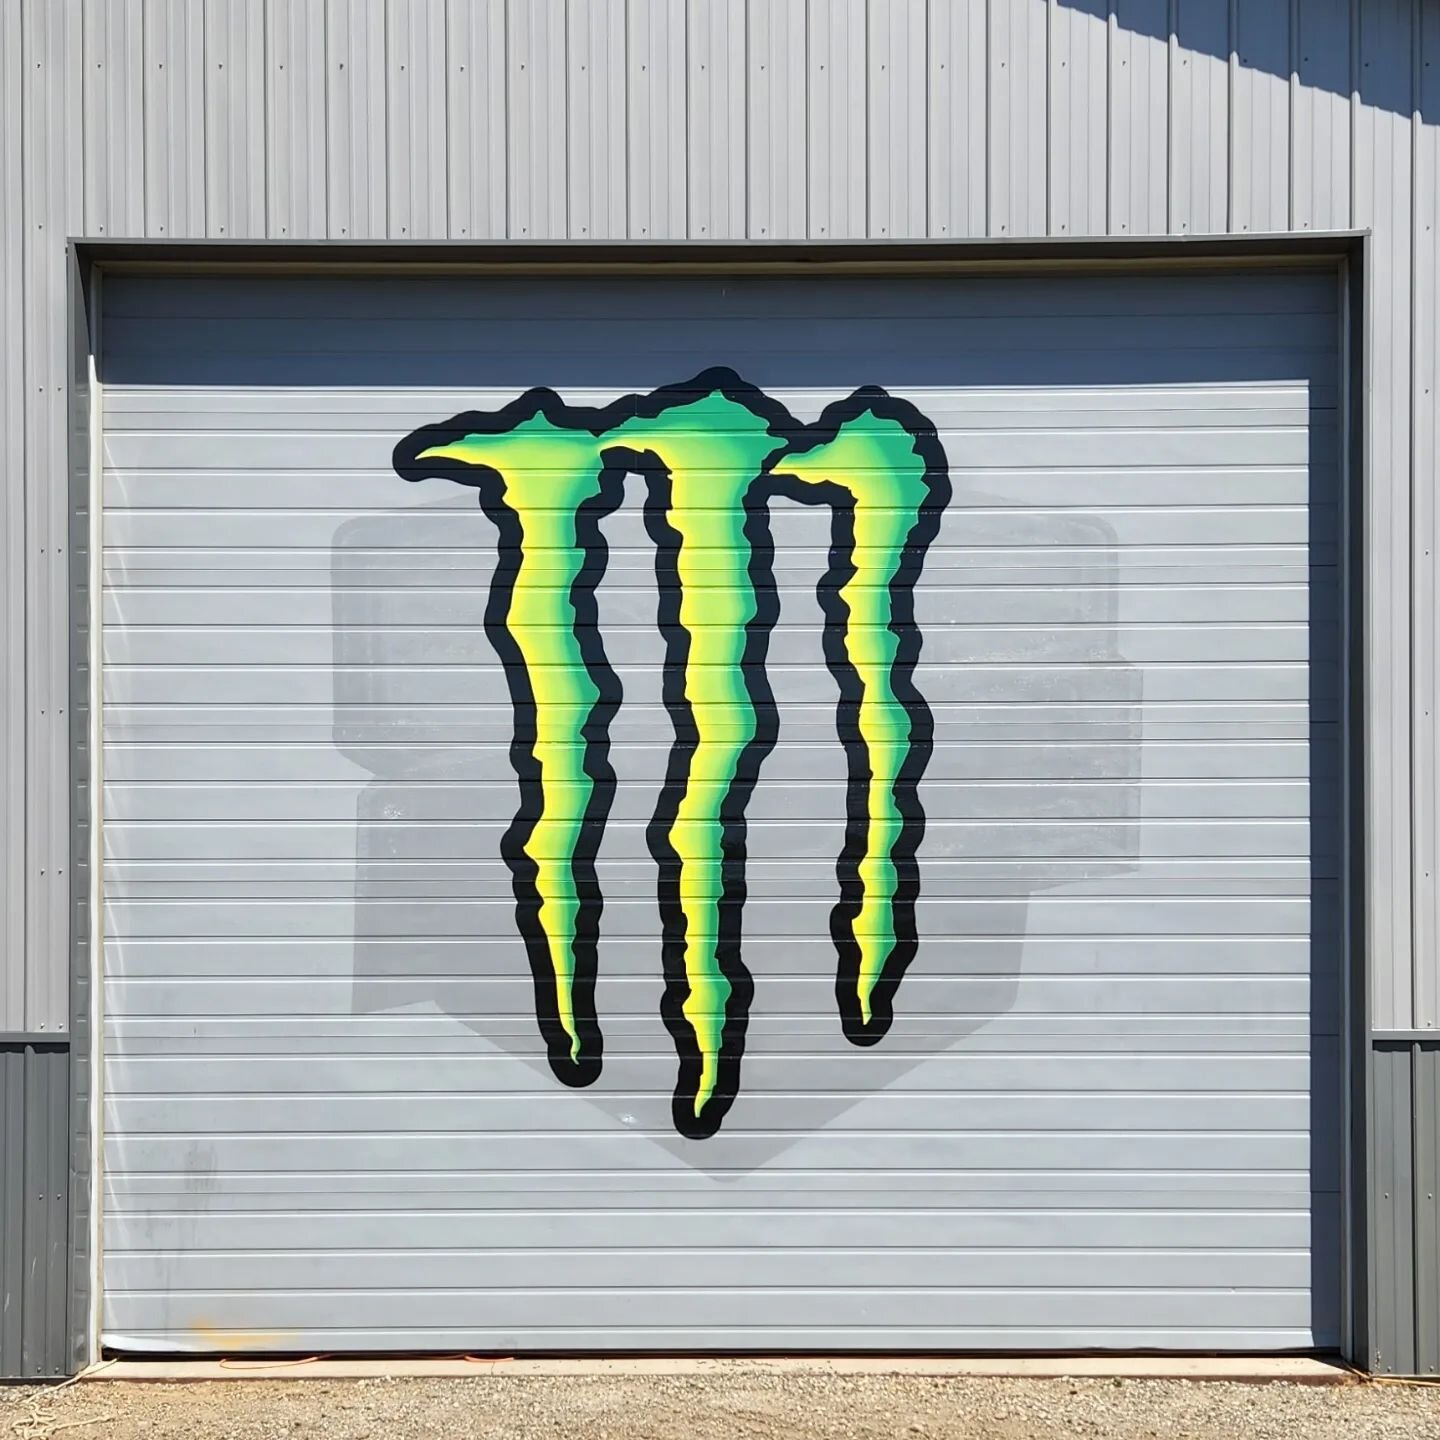 It was great day for some decal work at @redbudmx motocross track today in Michigan!

We did the @monsterenergy garage door and water truck. This weekend will be one of the biggest races of the year! 

#redbudmx #monsterenergy #freedomdecalsinc 
.
.
